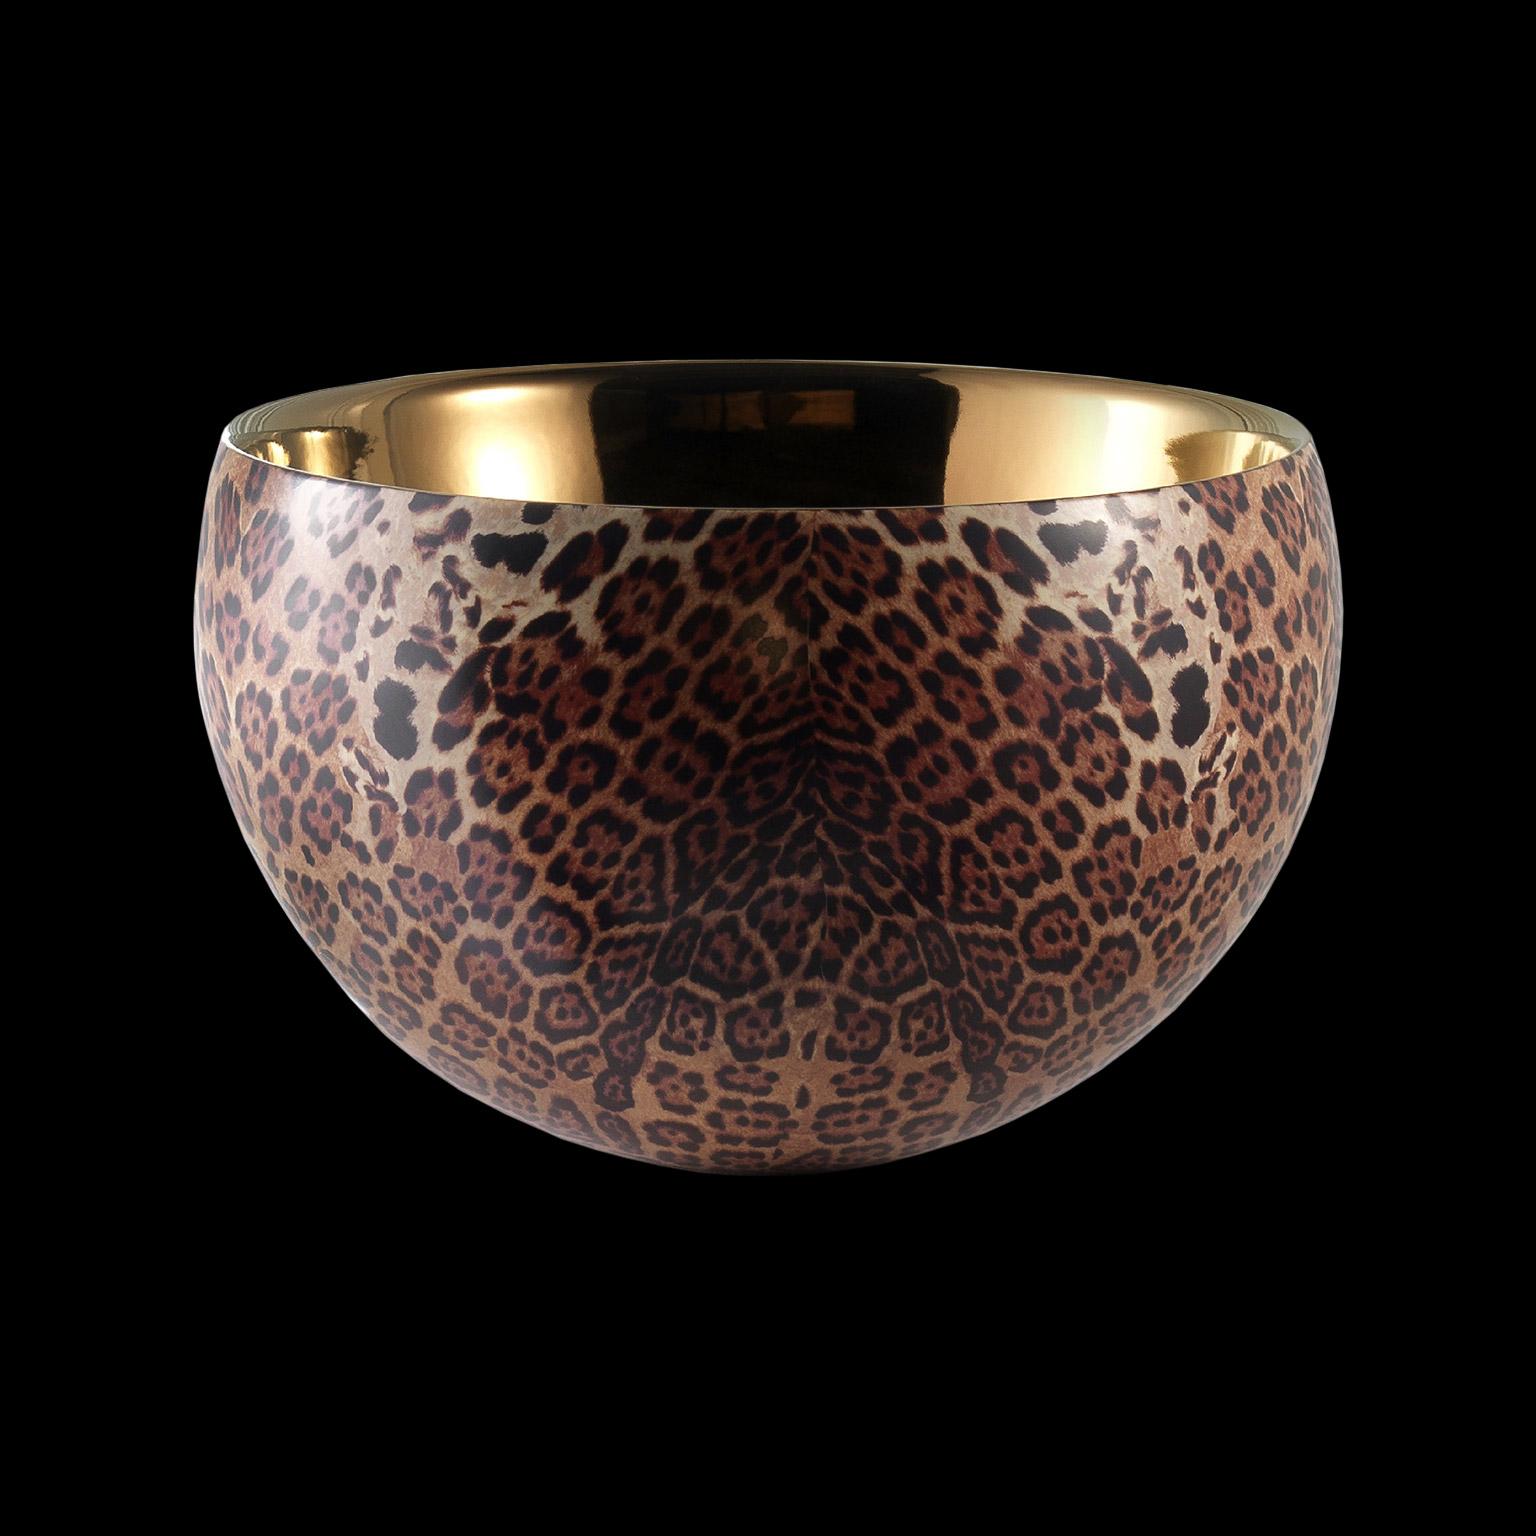 Ceramic bowl BOWLS handcrafted in bronze with leopard decoration outside

cod. BA055
measures: H. 30.0 cm. - Dm. 55.0 cm.